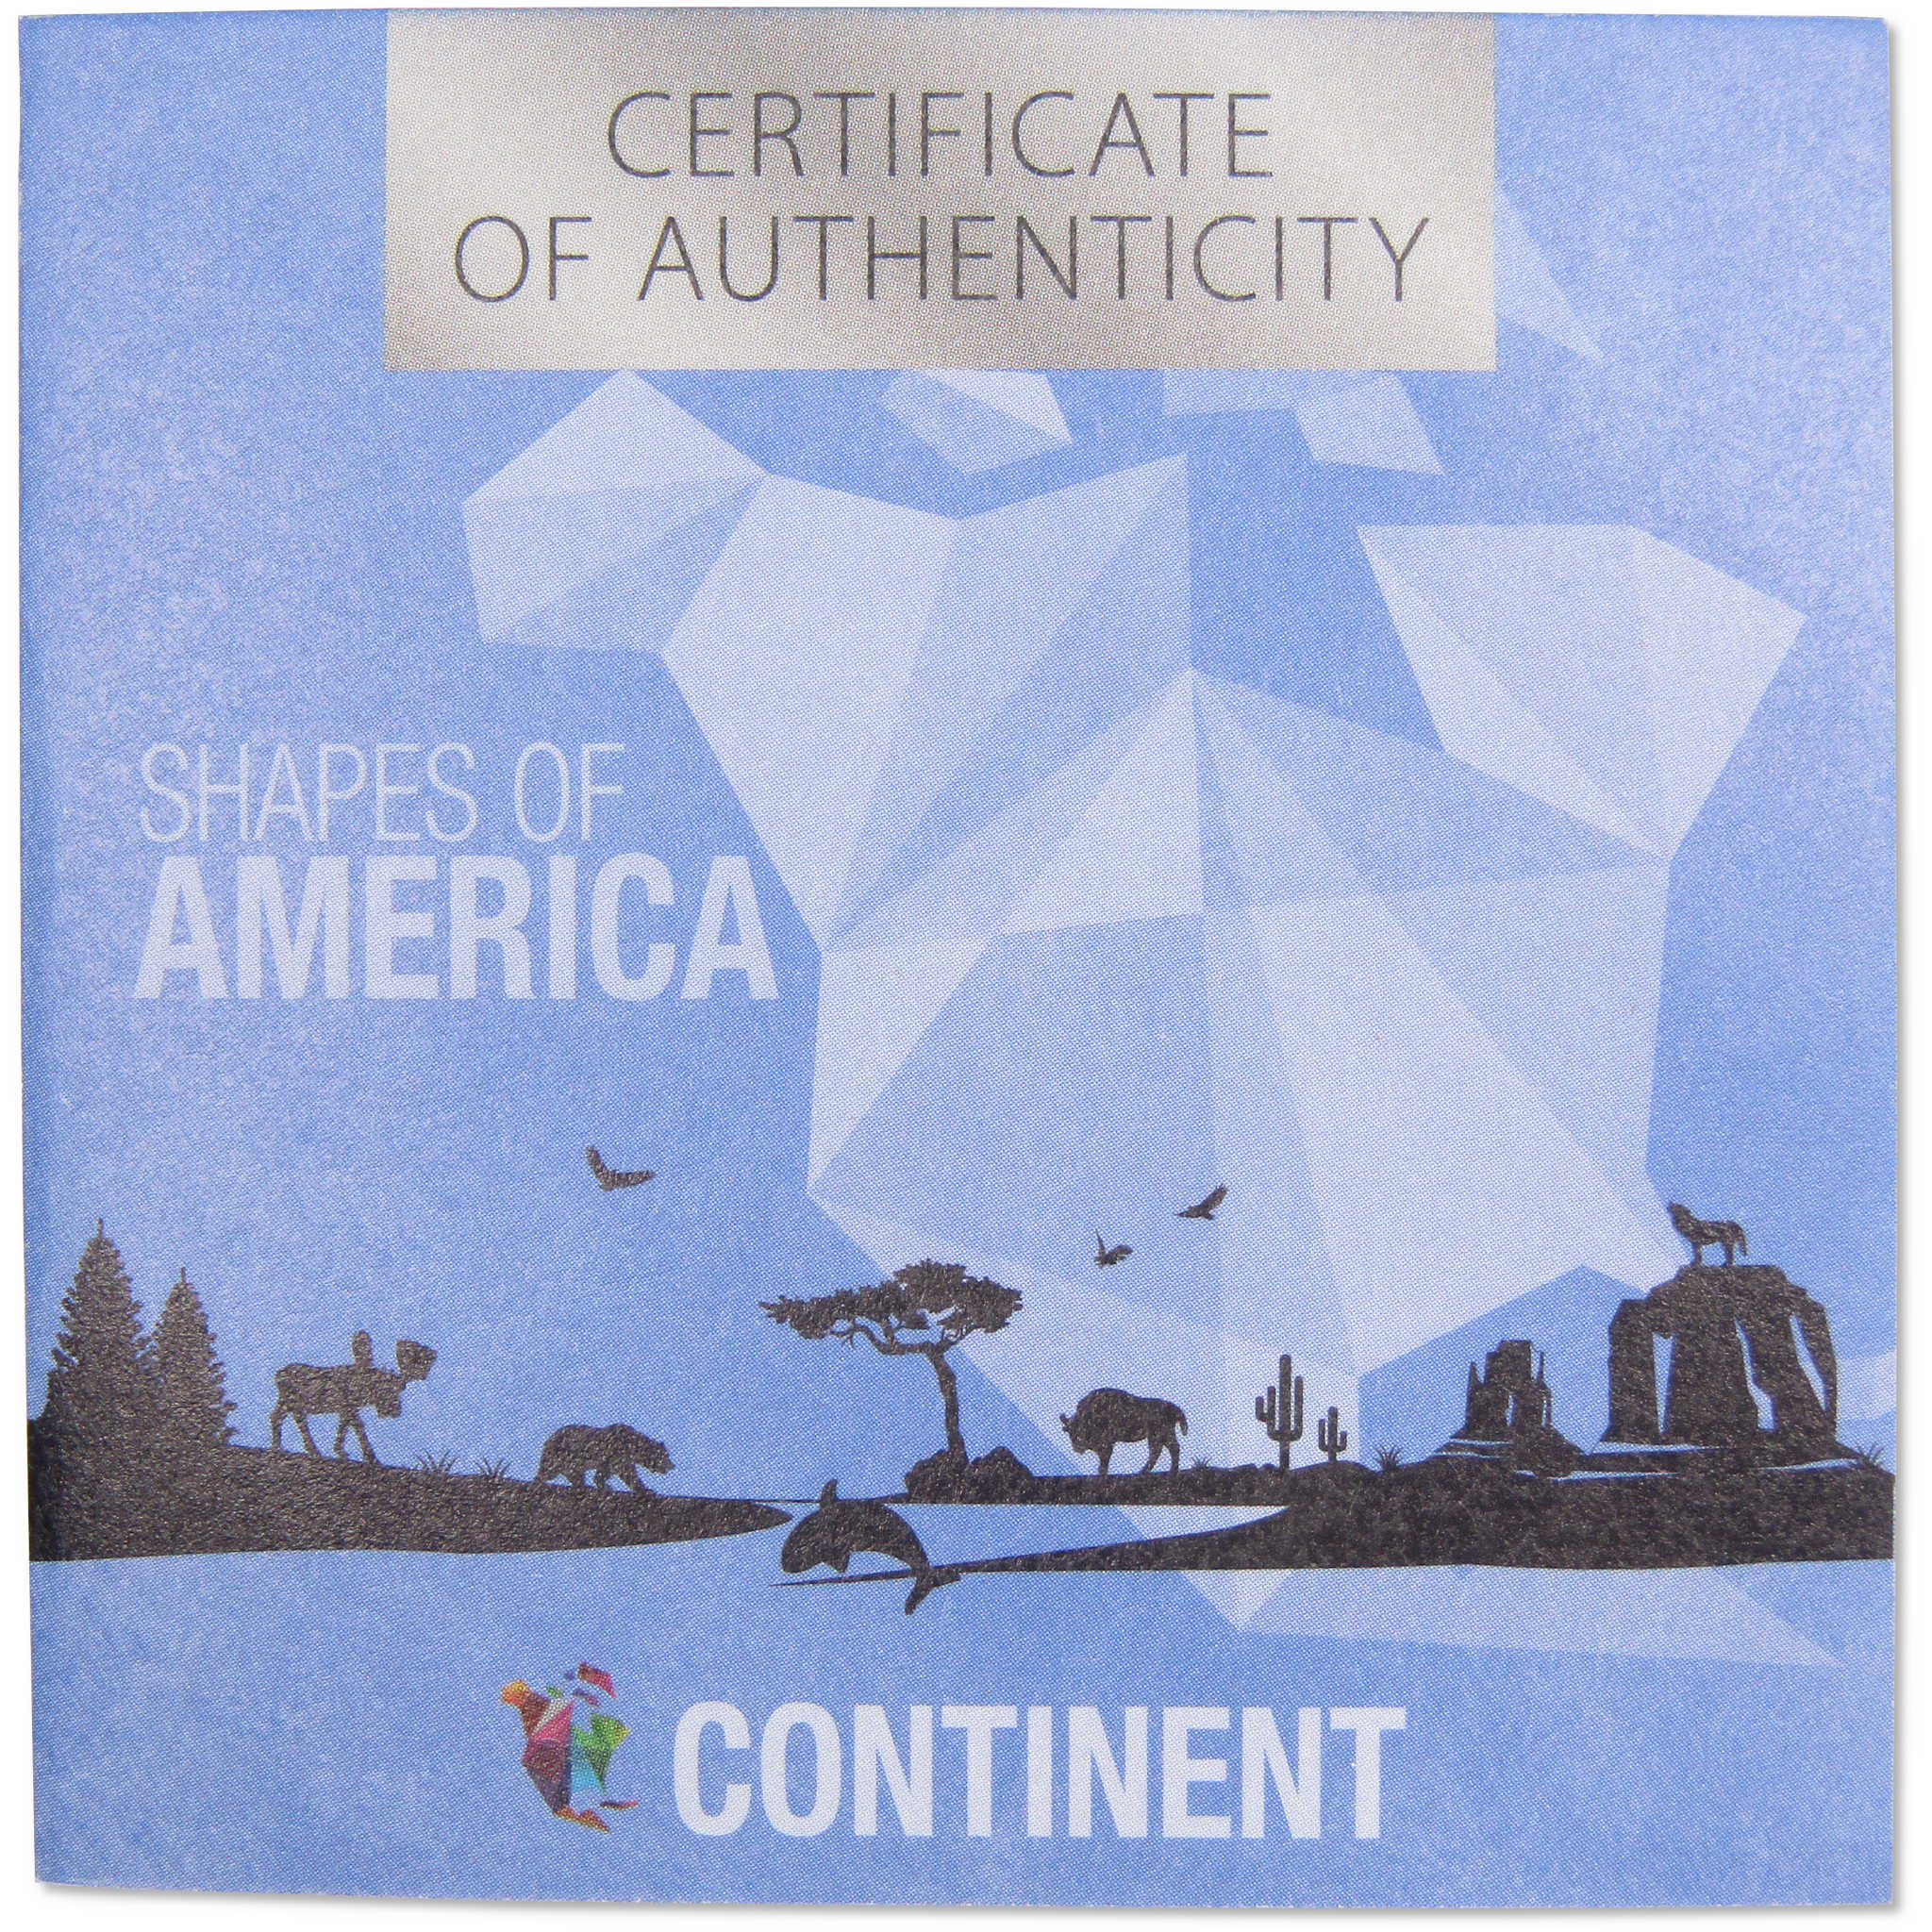 Shapes of America Continent 1 oz .999 Silver $5 Proof-Like 2020 Barbados COA